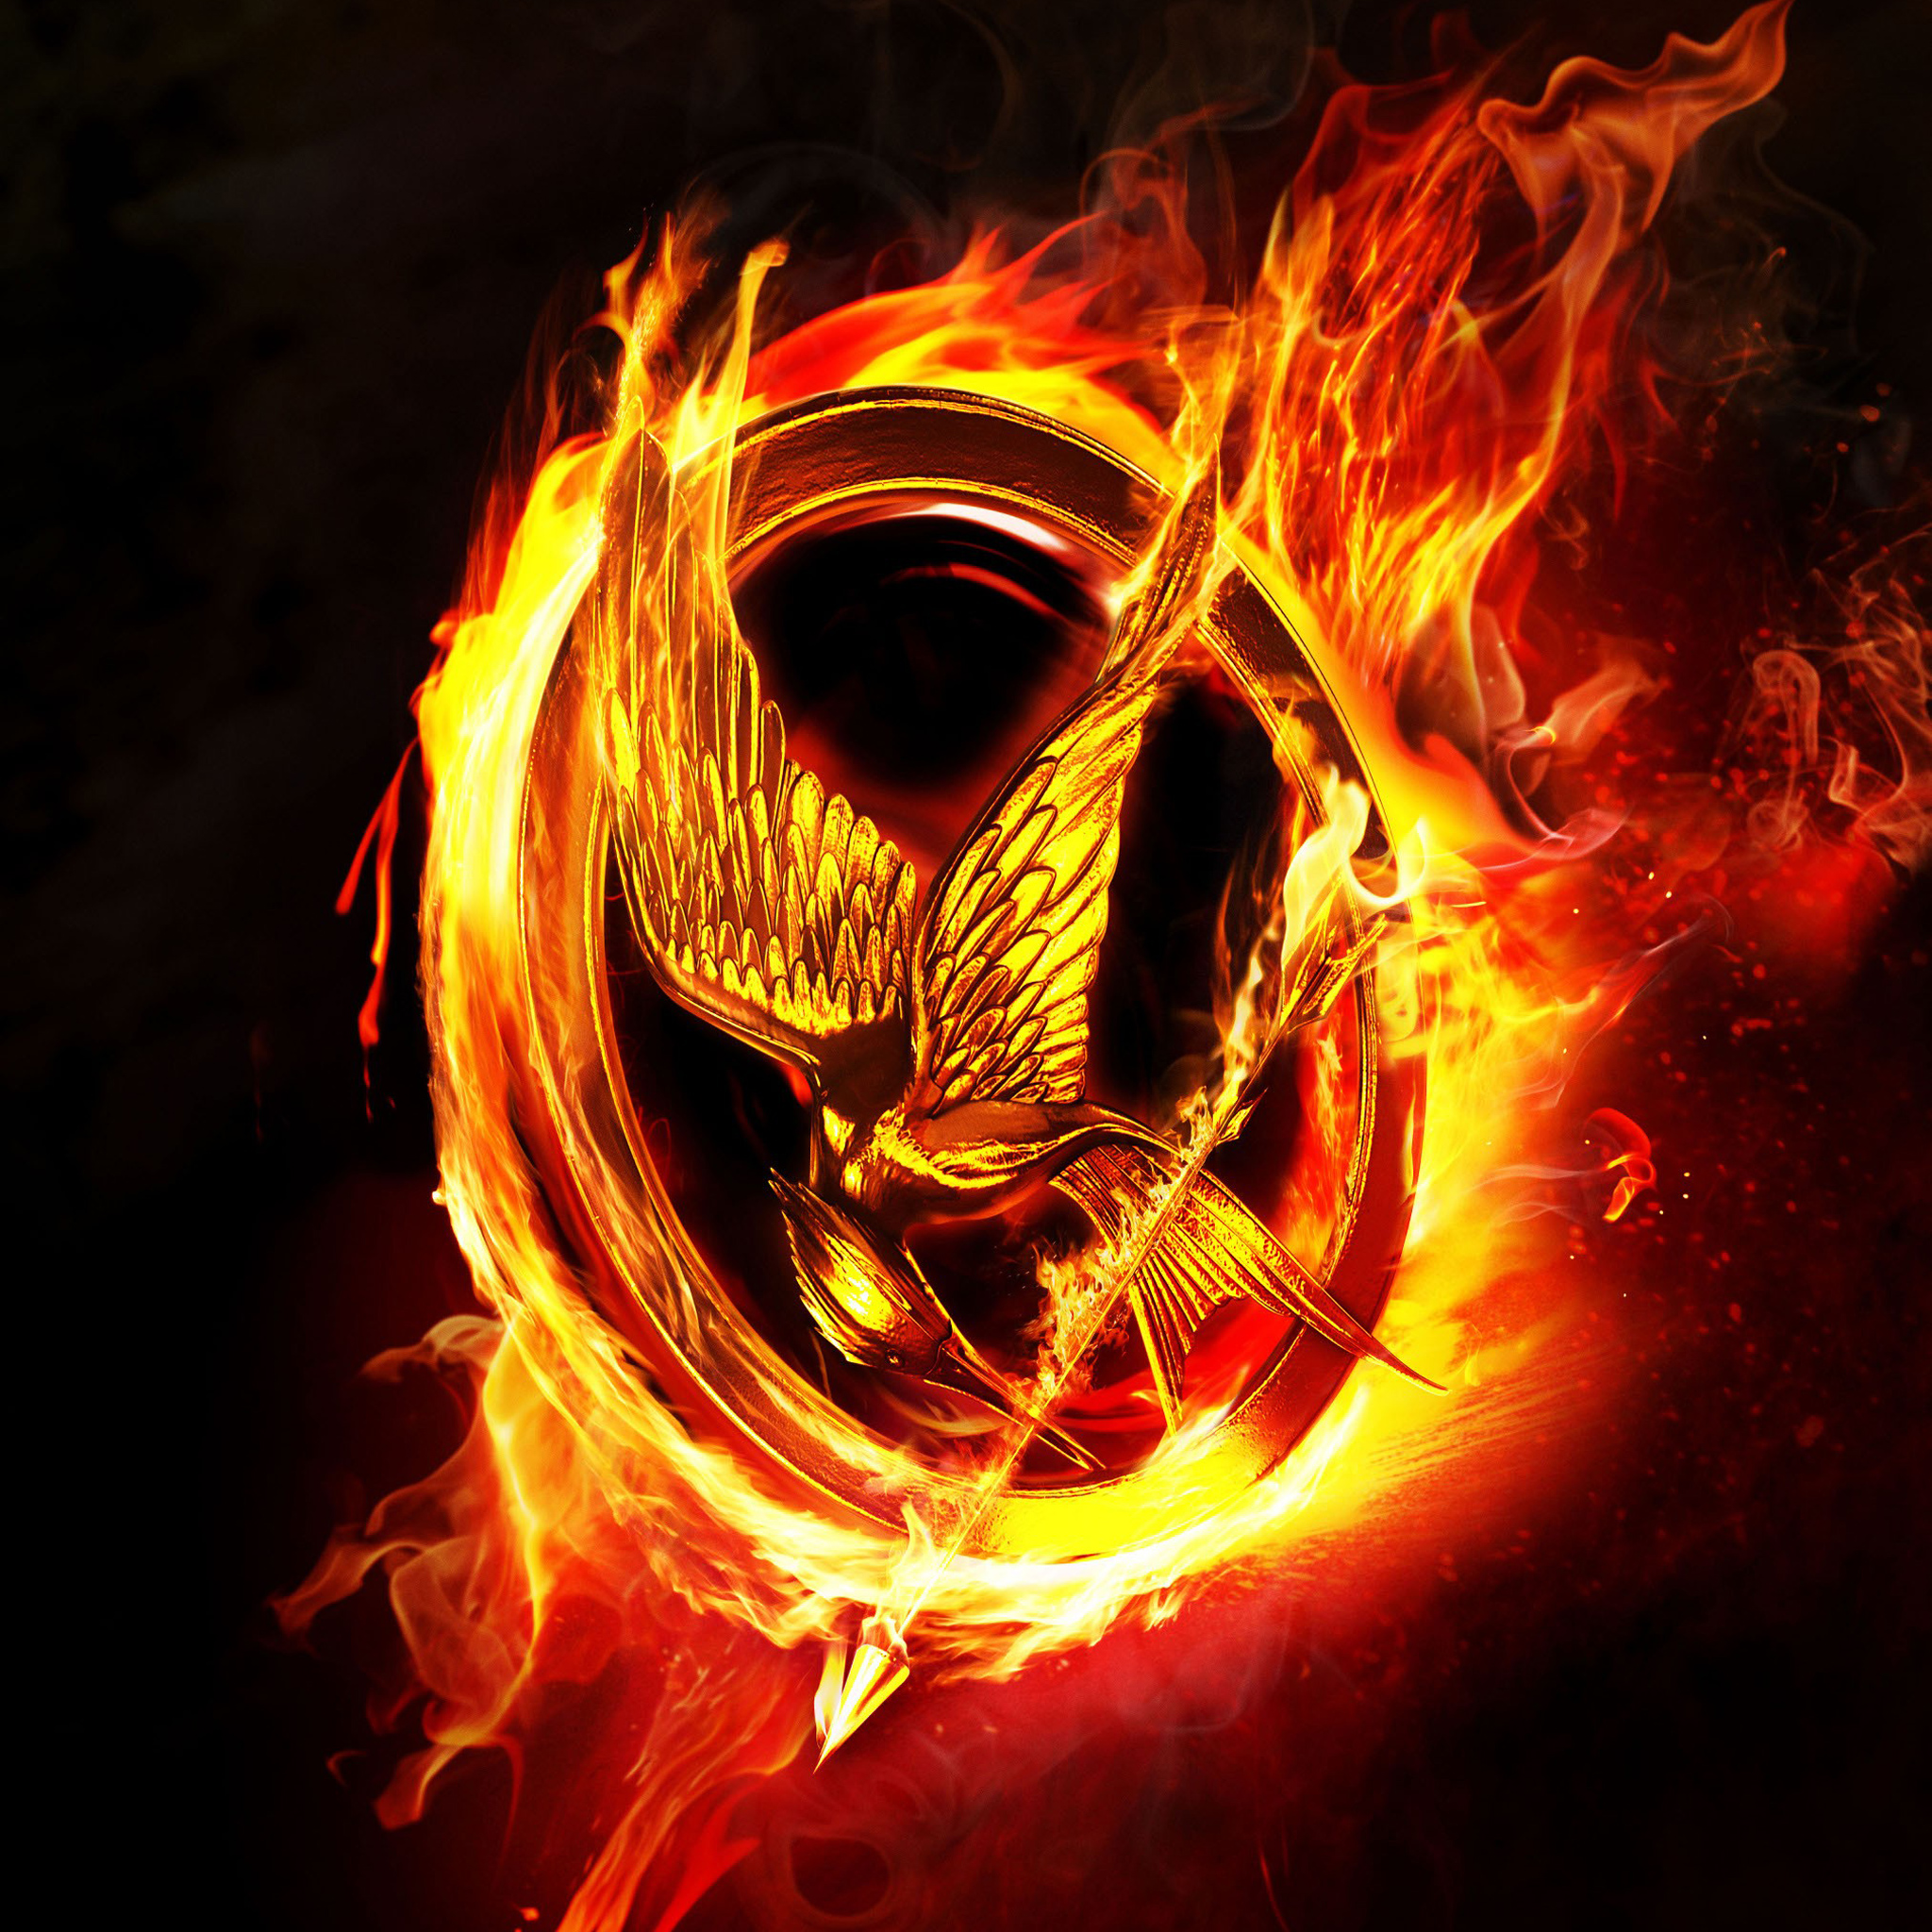 iPad Wallpaper Pack Of Wod March The Hunger Games